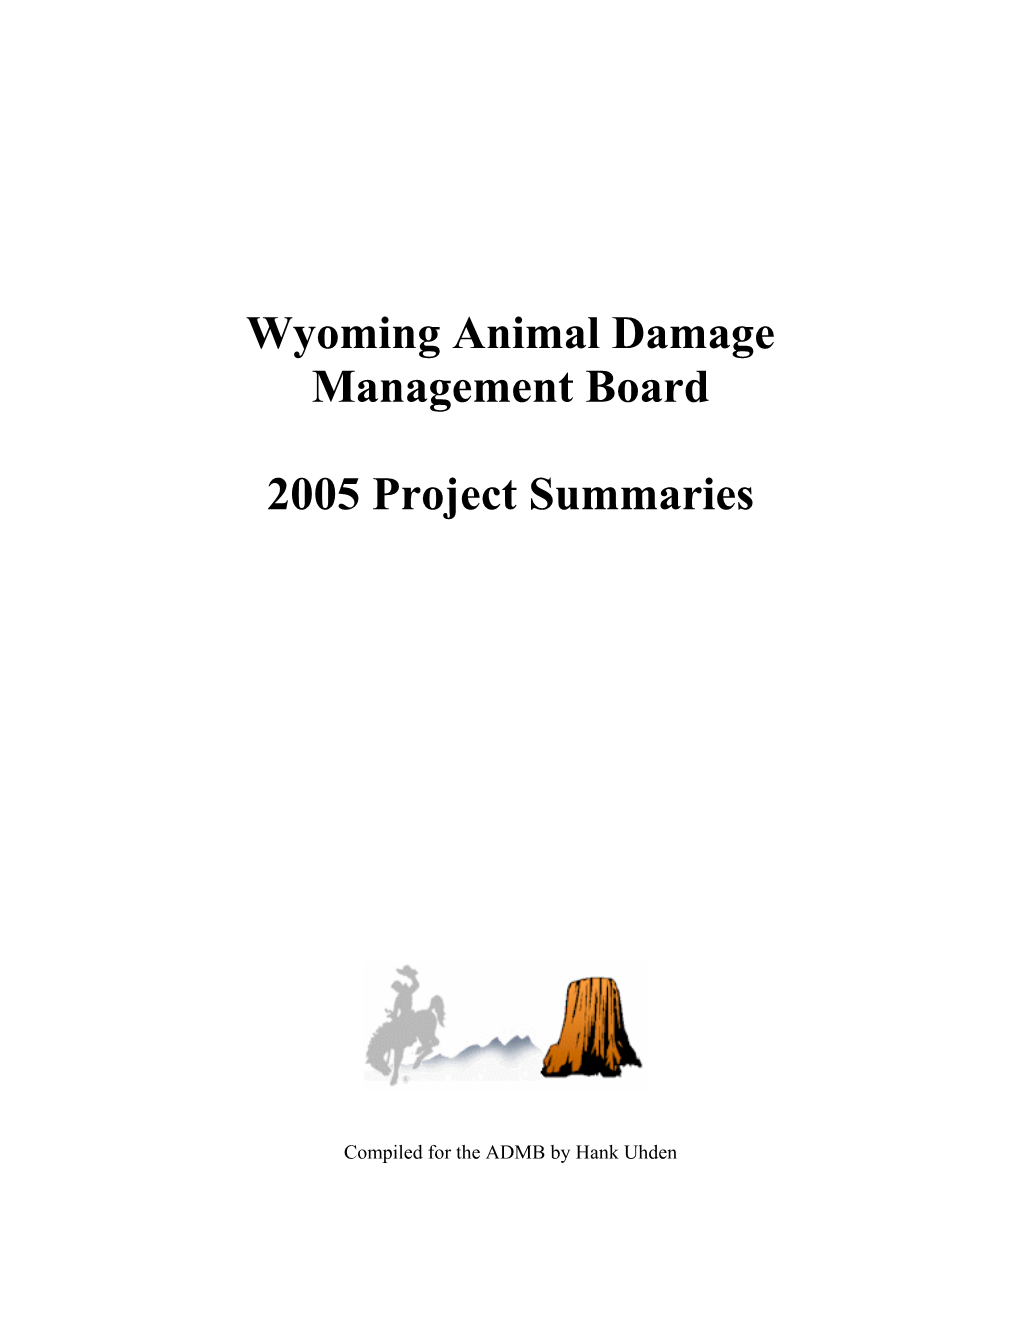 Wyoming Animal Damage Management Board 2005 Project